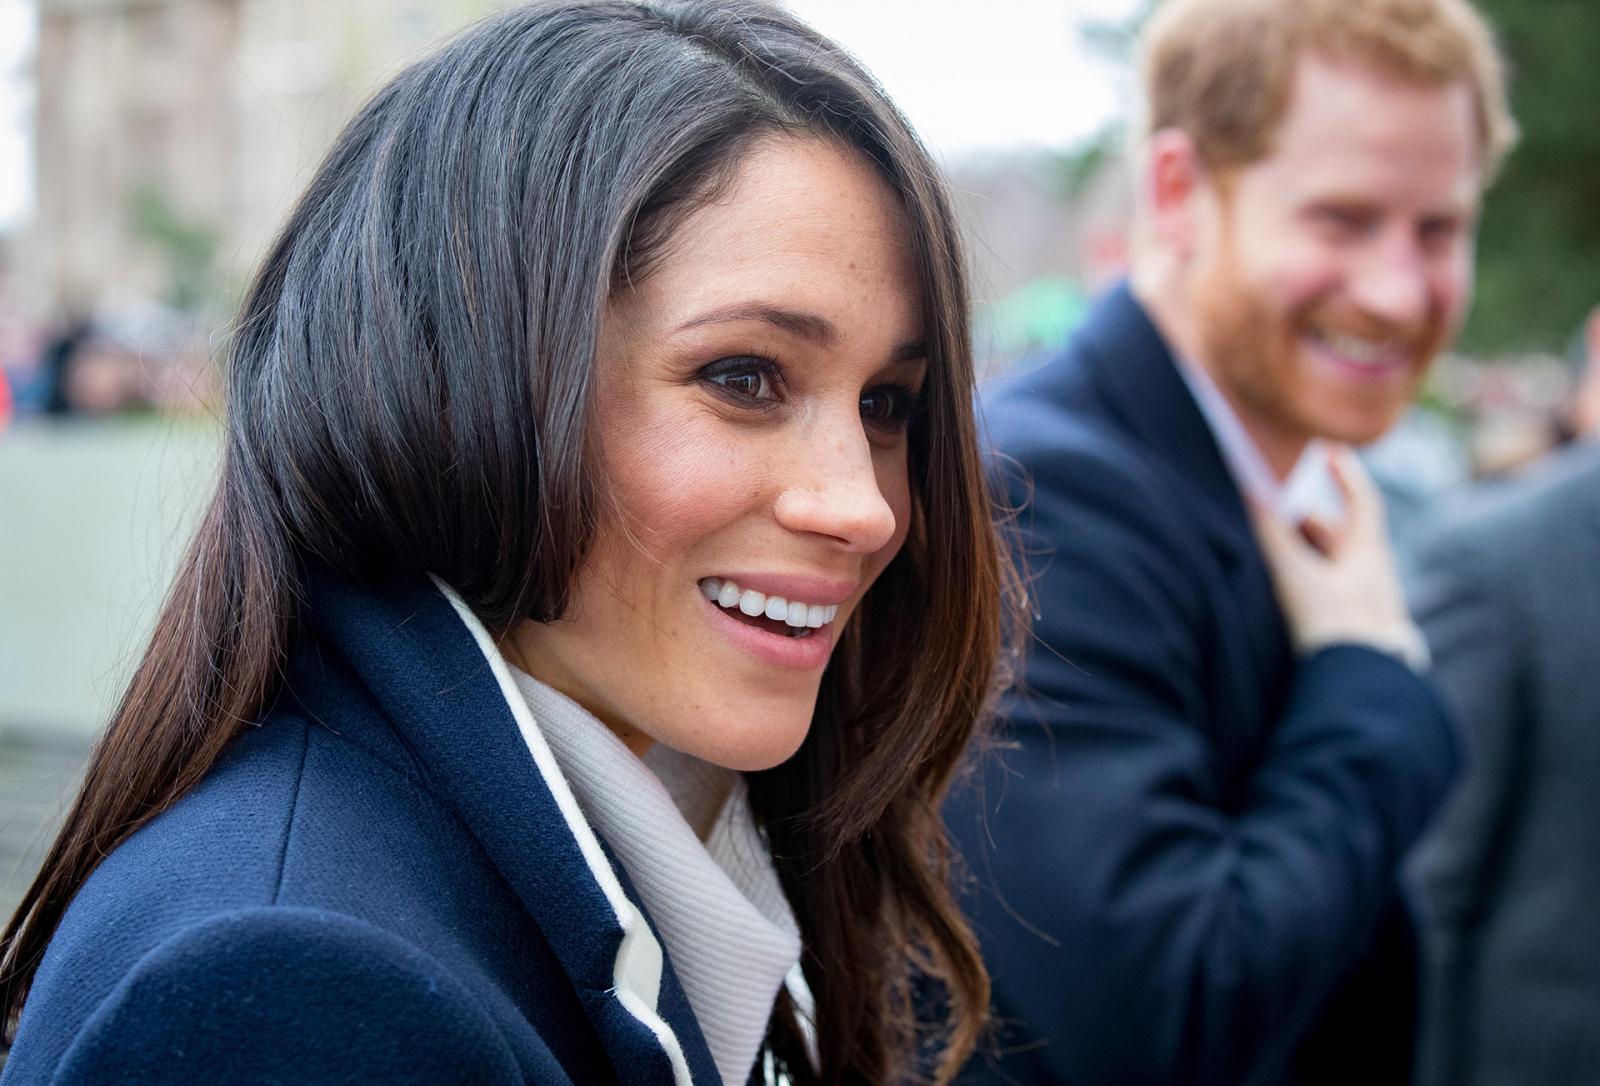 7 Fascinating Things You Didn't Know About Meghan Markle - image 4